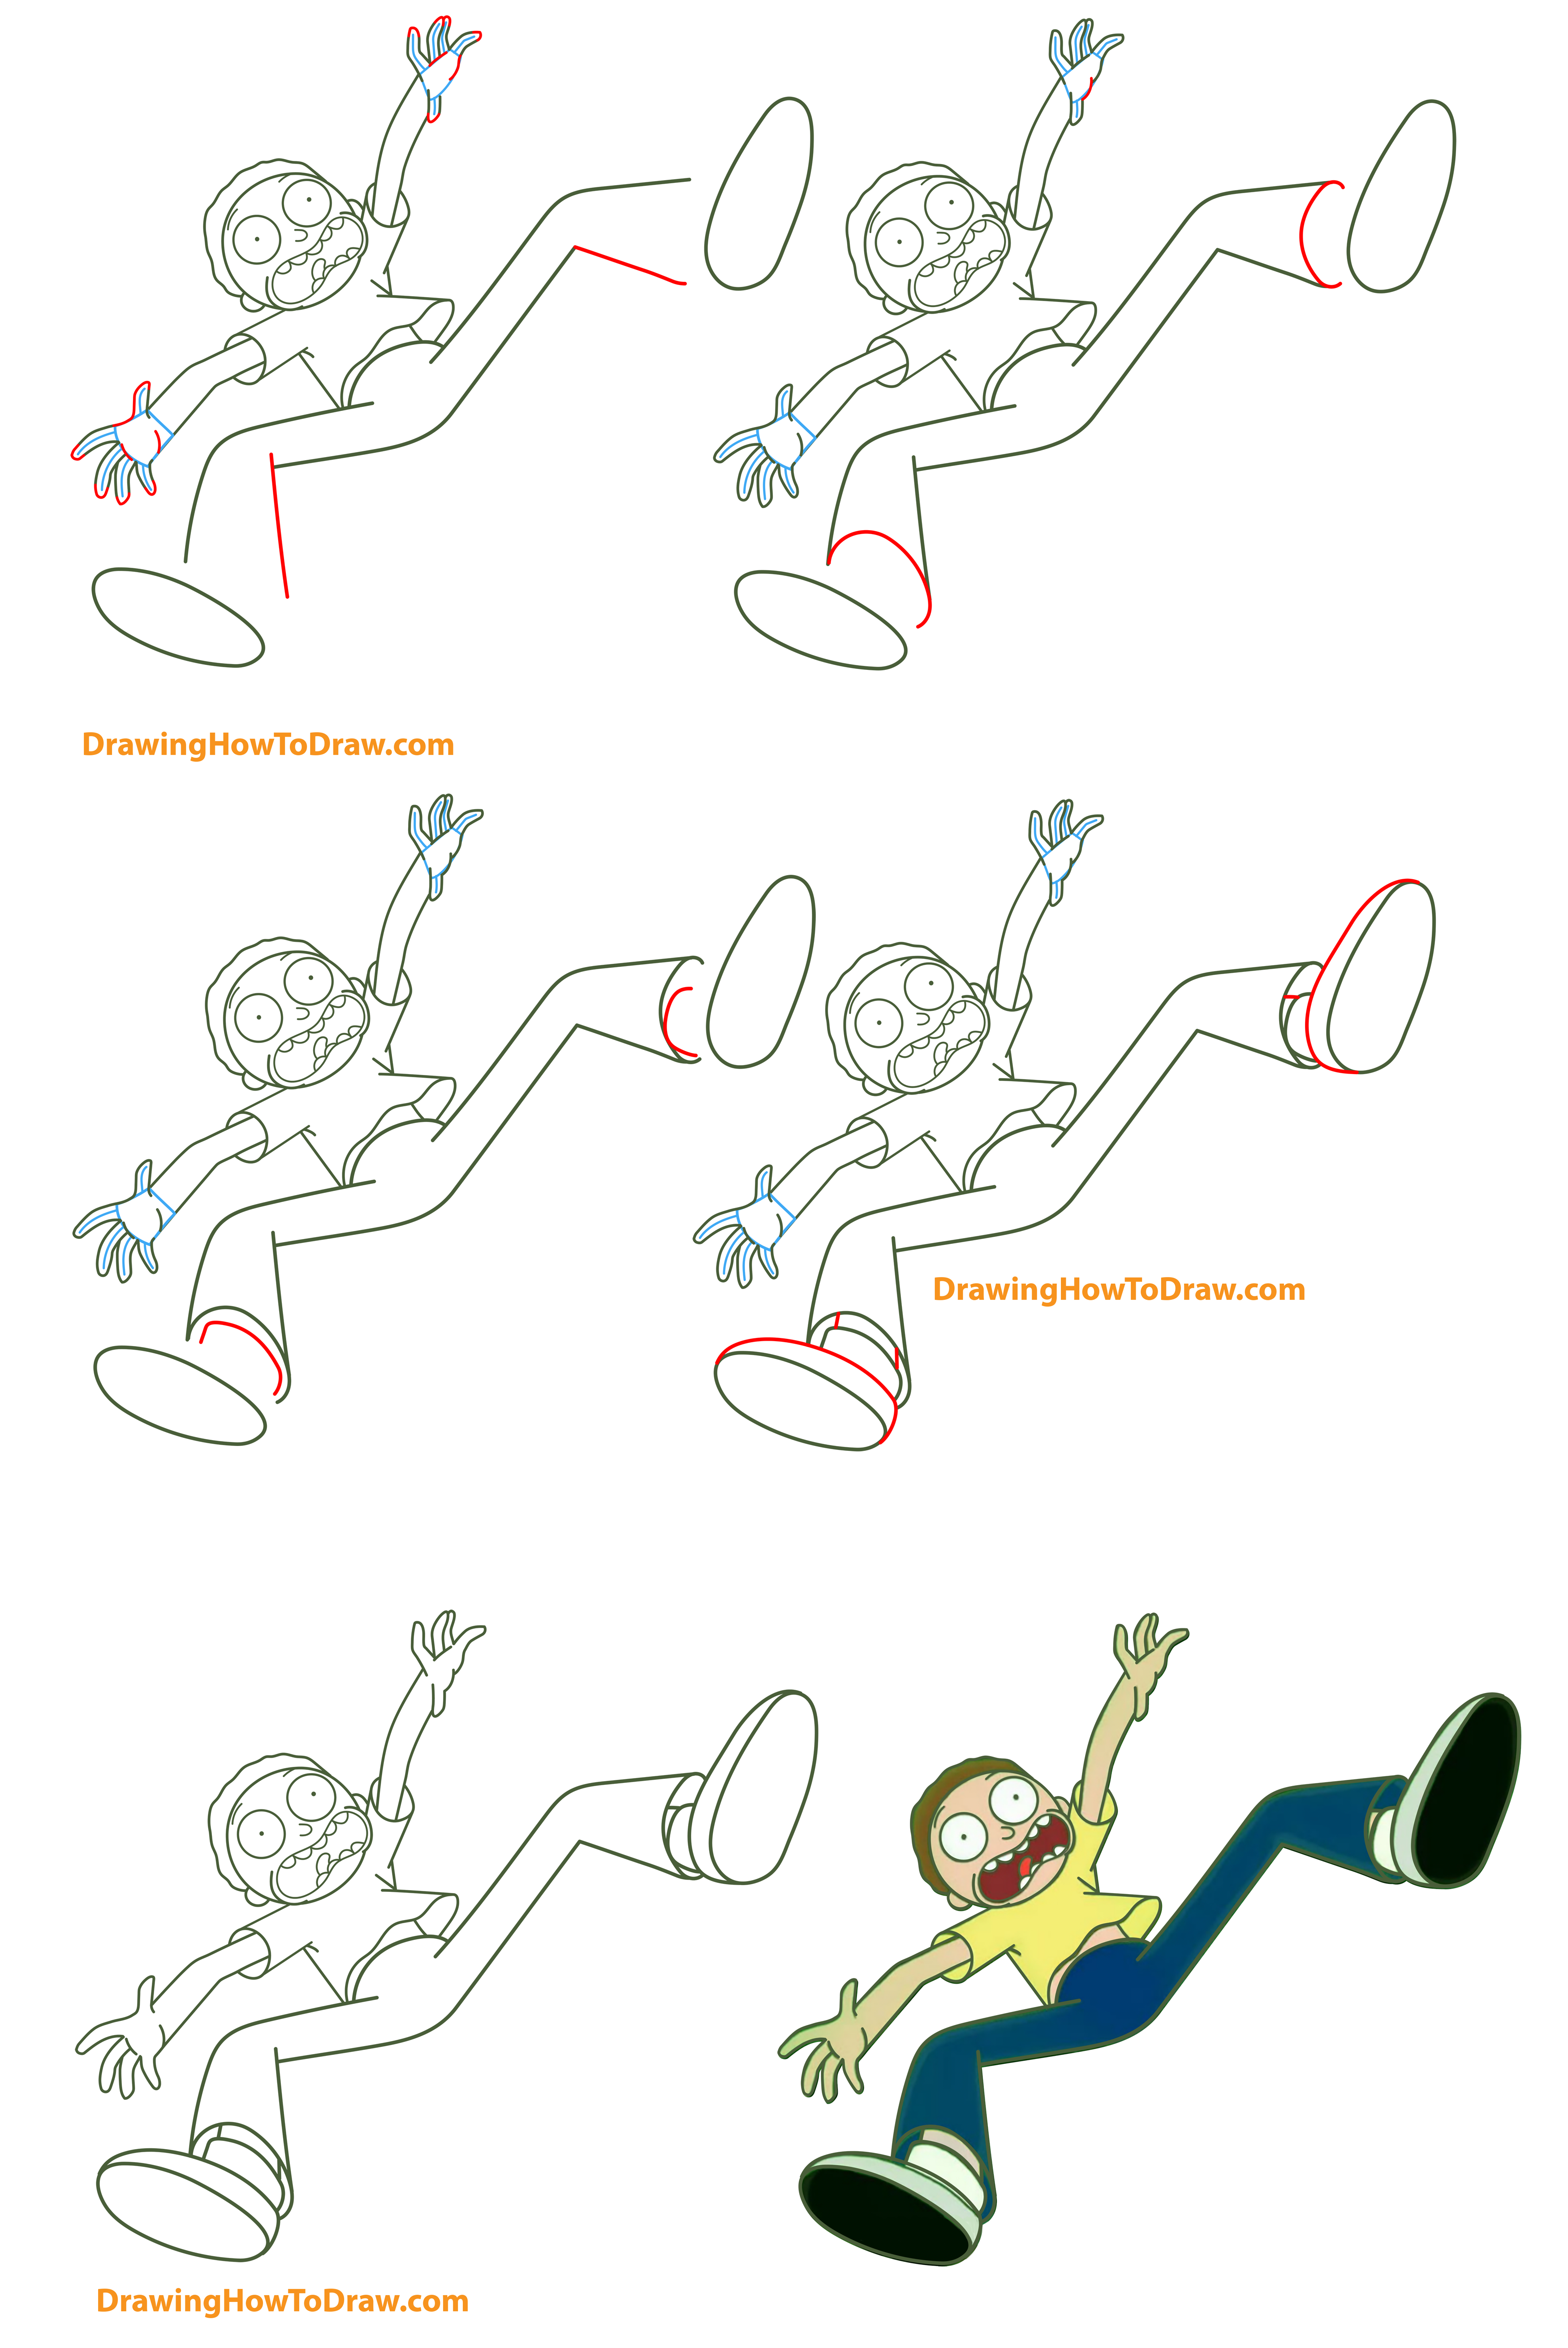 How to Draw Morty from Rick and Morty Easy Step-by-Step Drawing Tutorial